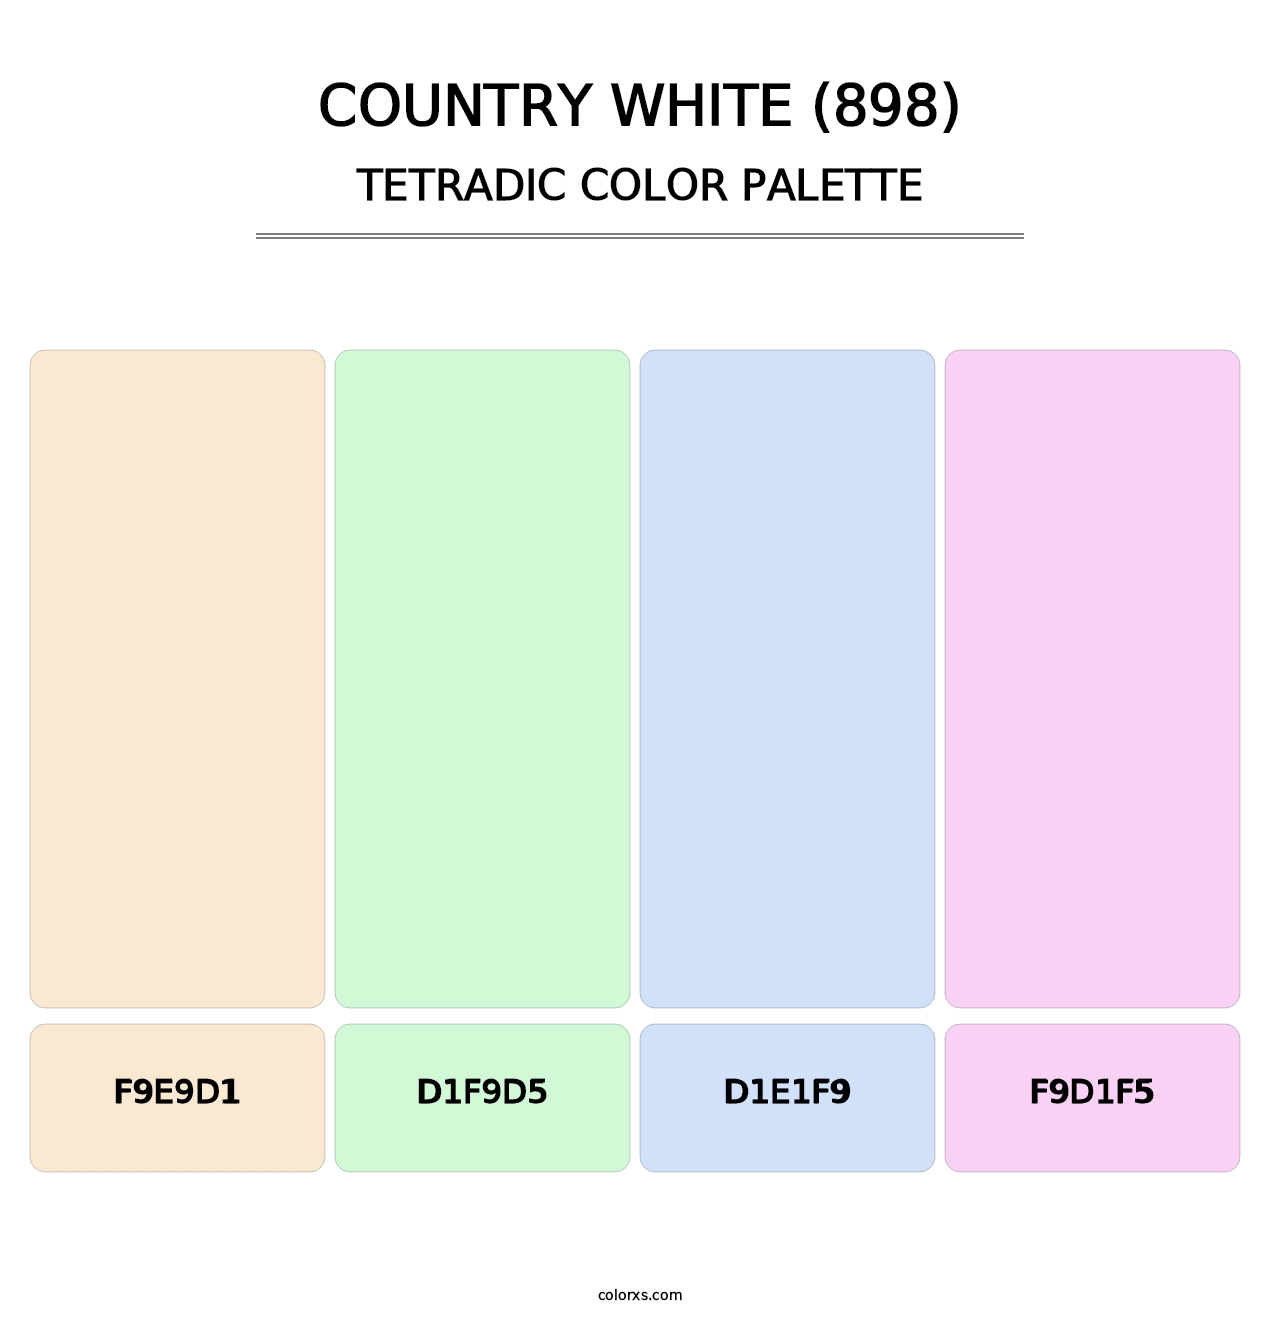 Country White (898) - Tetradic Color Palette